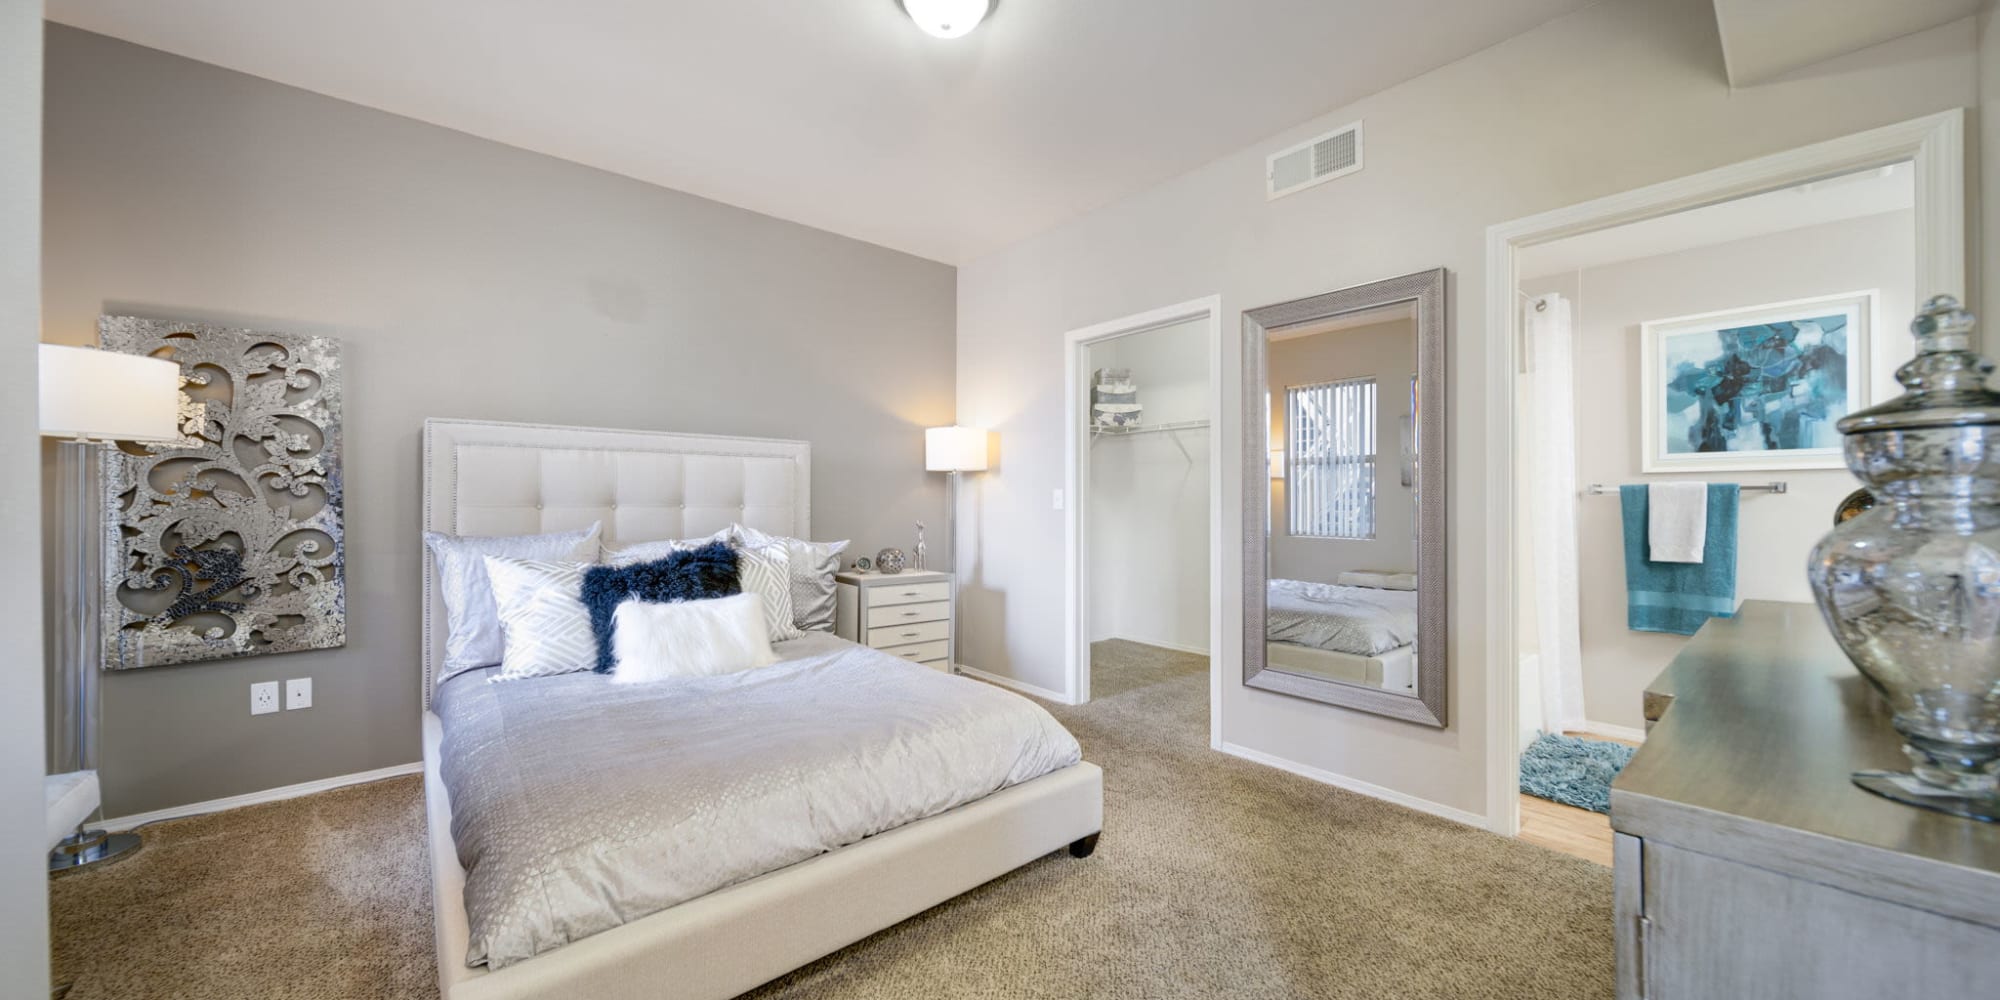 Bedroom at The Trails at Pioneer Meadows in Sparks, Nevada